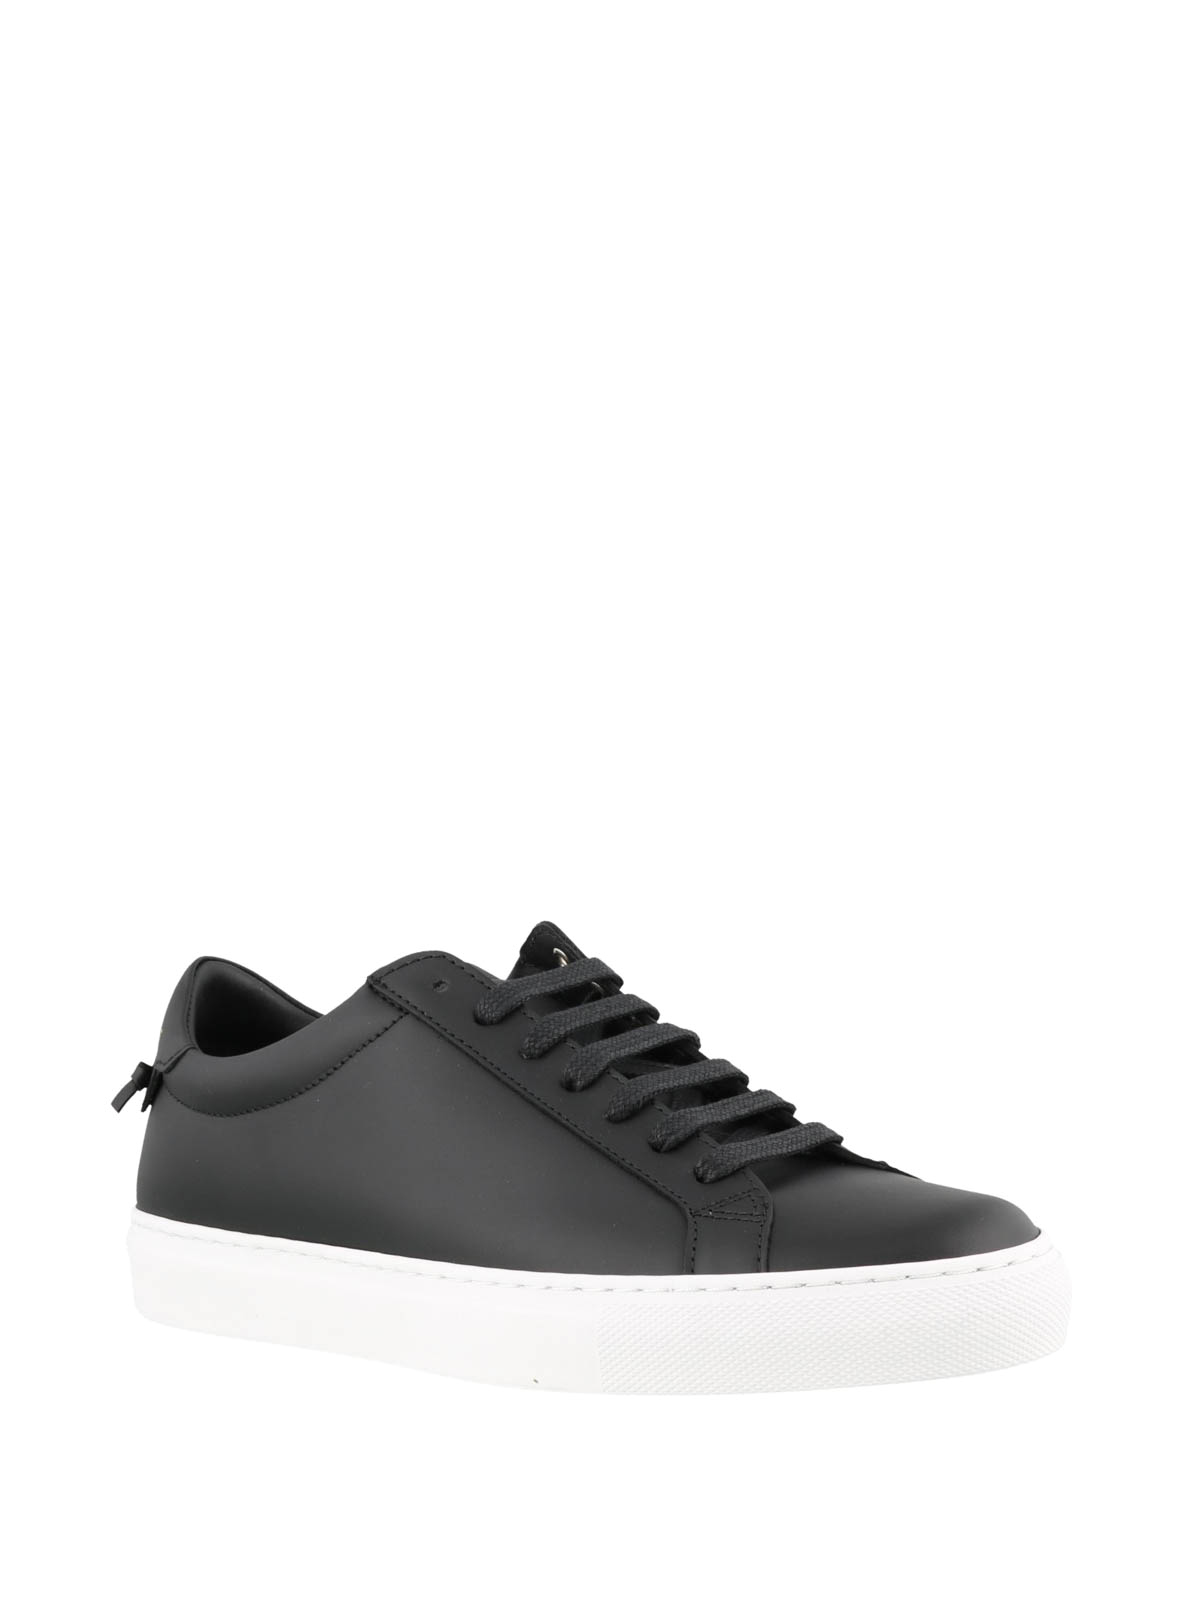 givenchy trainers sale